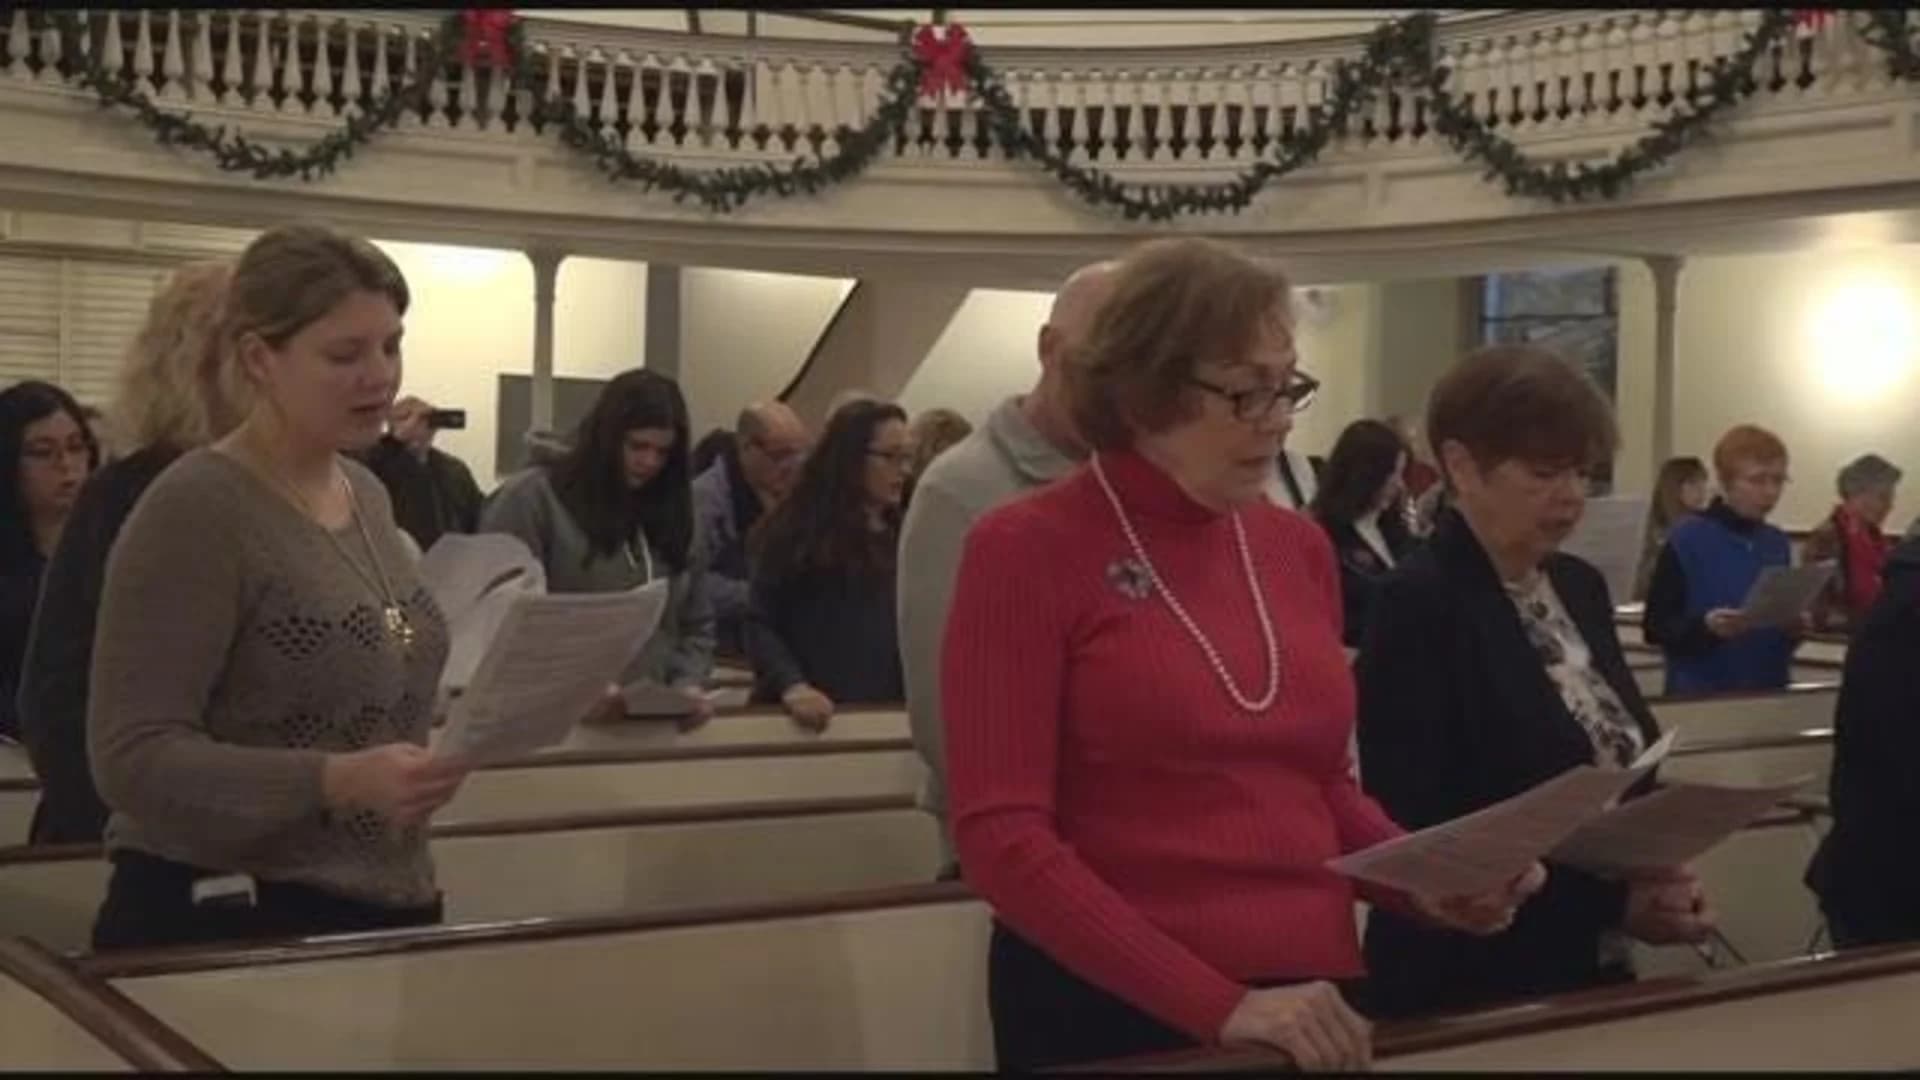 Church in Bensonhurst opens doors for first time in 15 years